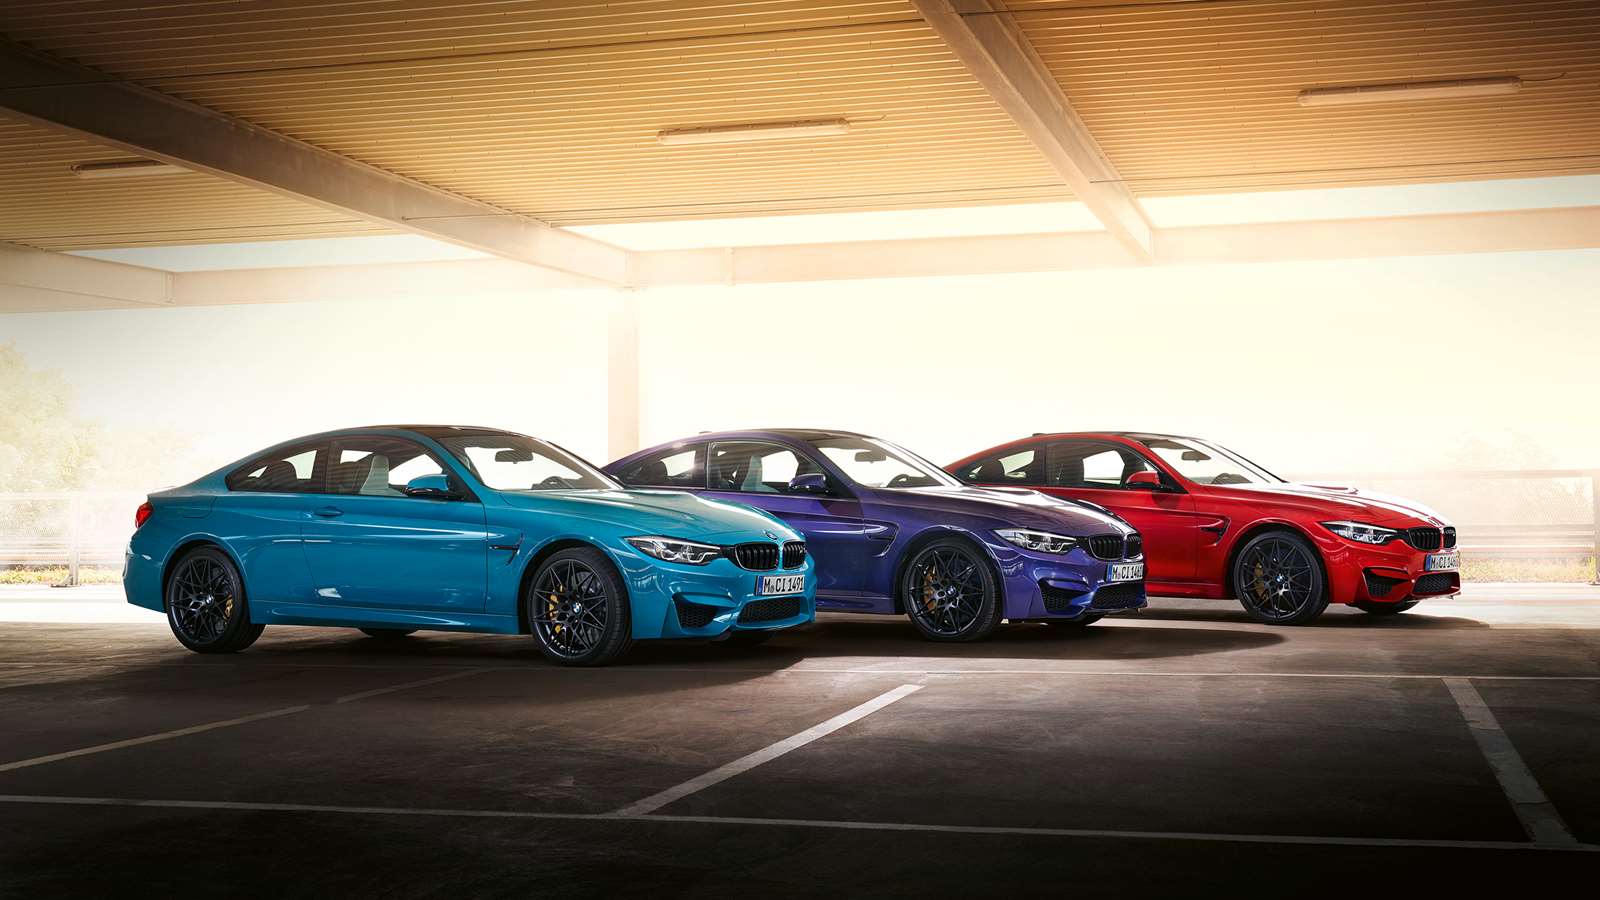 The Bmw M4 Heritage Edition Is A Colourful Tribute To M Sport S Past